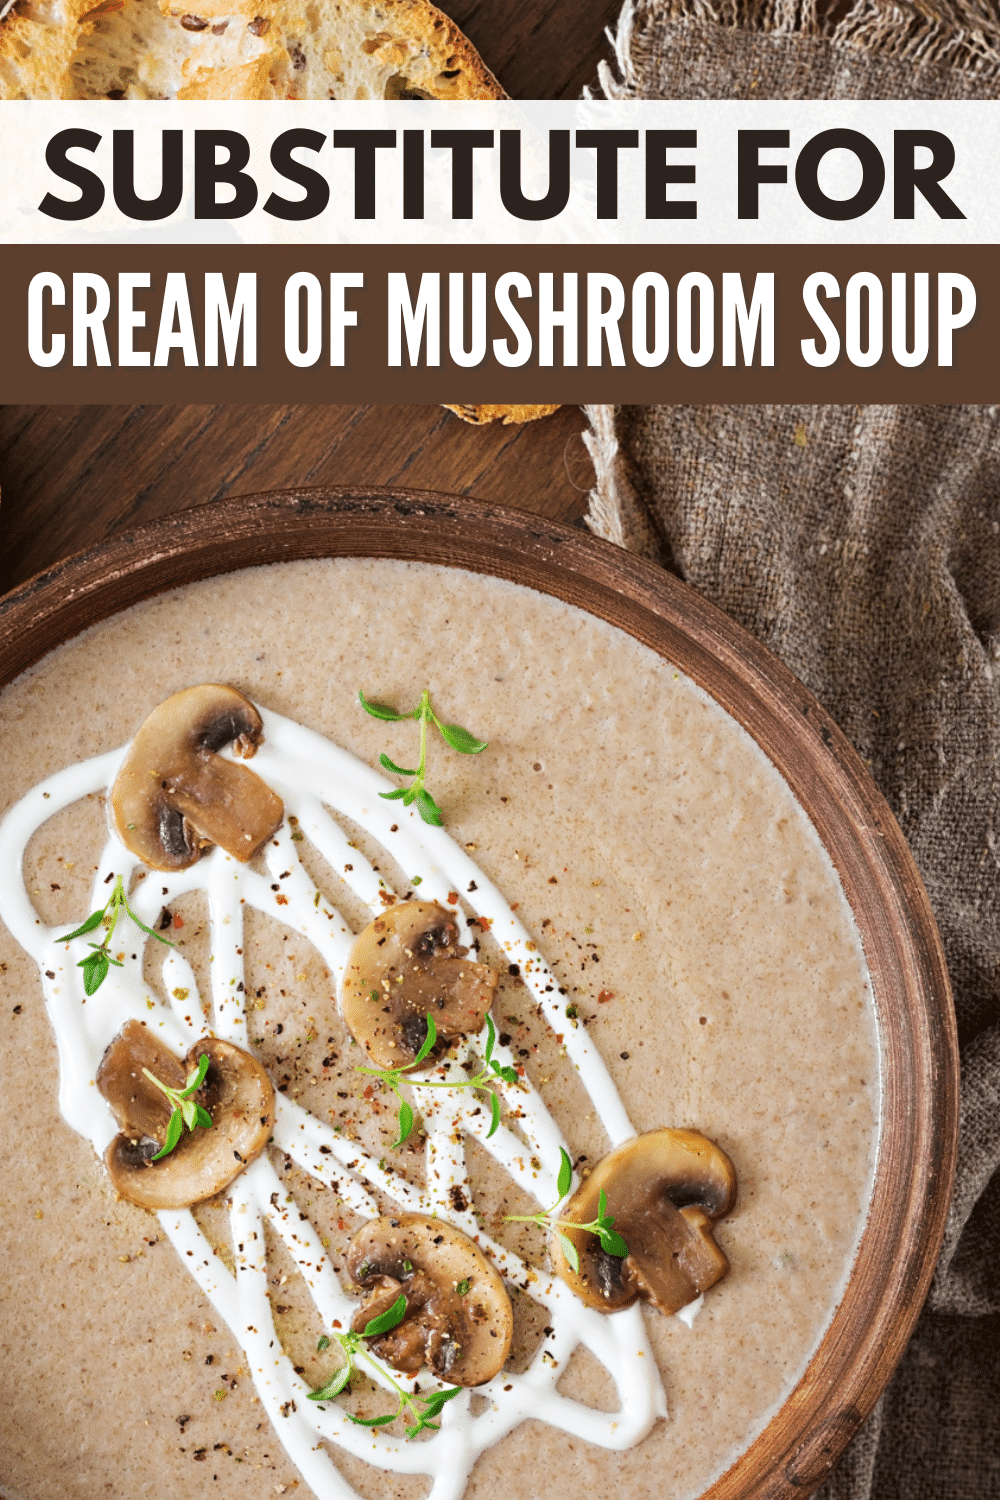 A bowl of cream of mushroom soup with the text substitute for cream of mushroom soup.